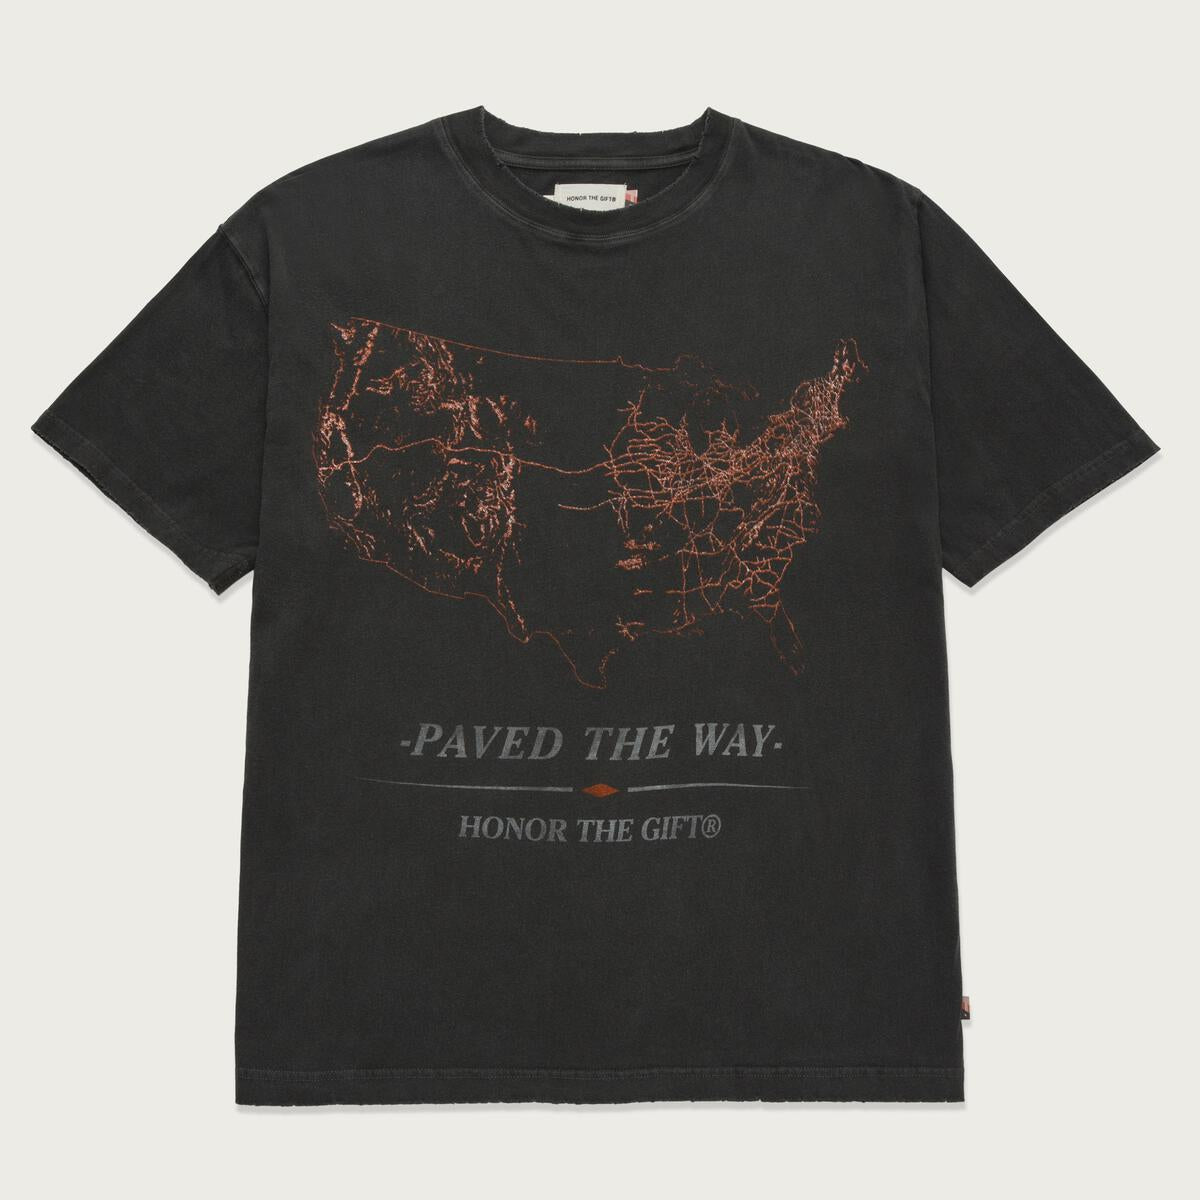 Honor The Gift Pave The Way Tee